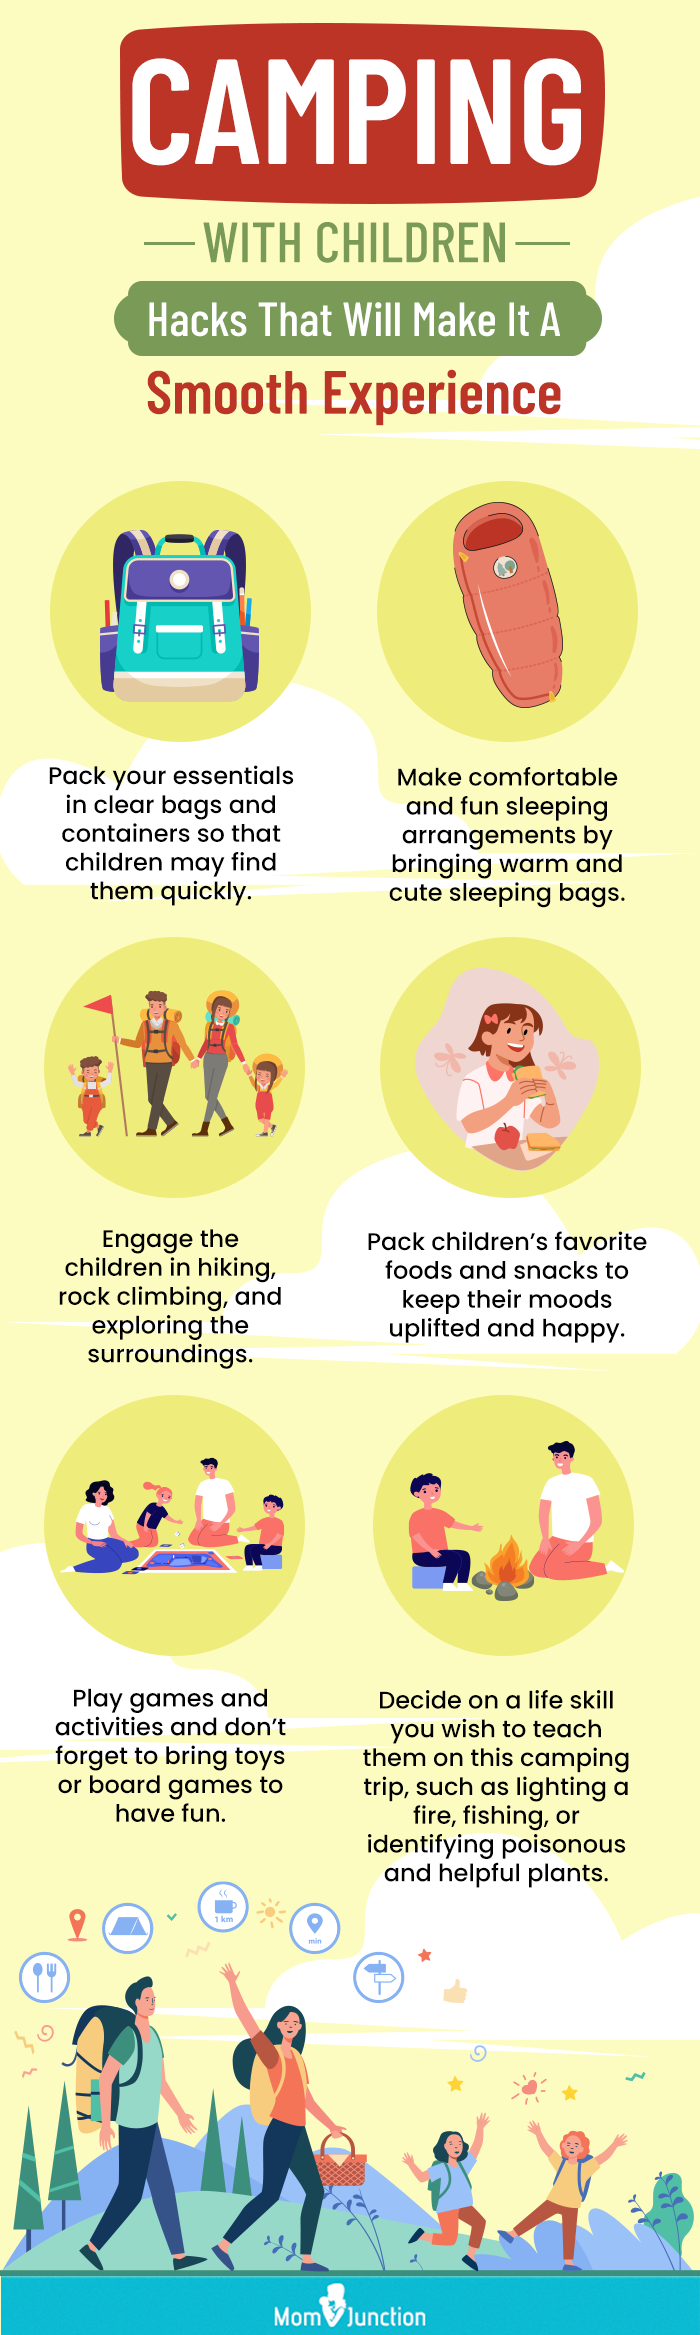 camping with childen hacks that will make a smooth experience [infographic]